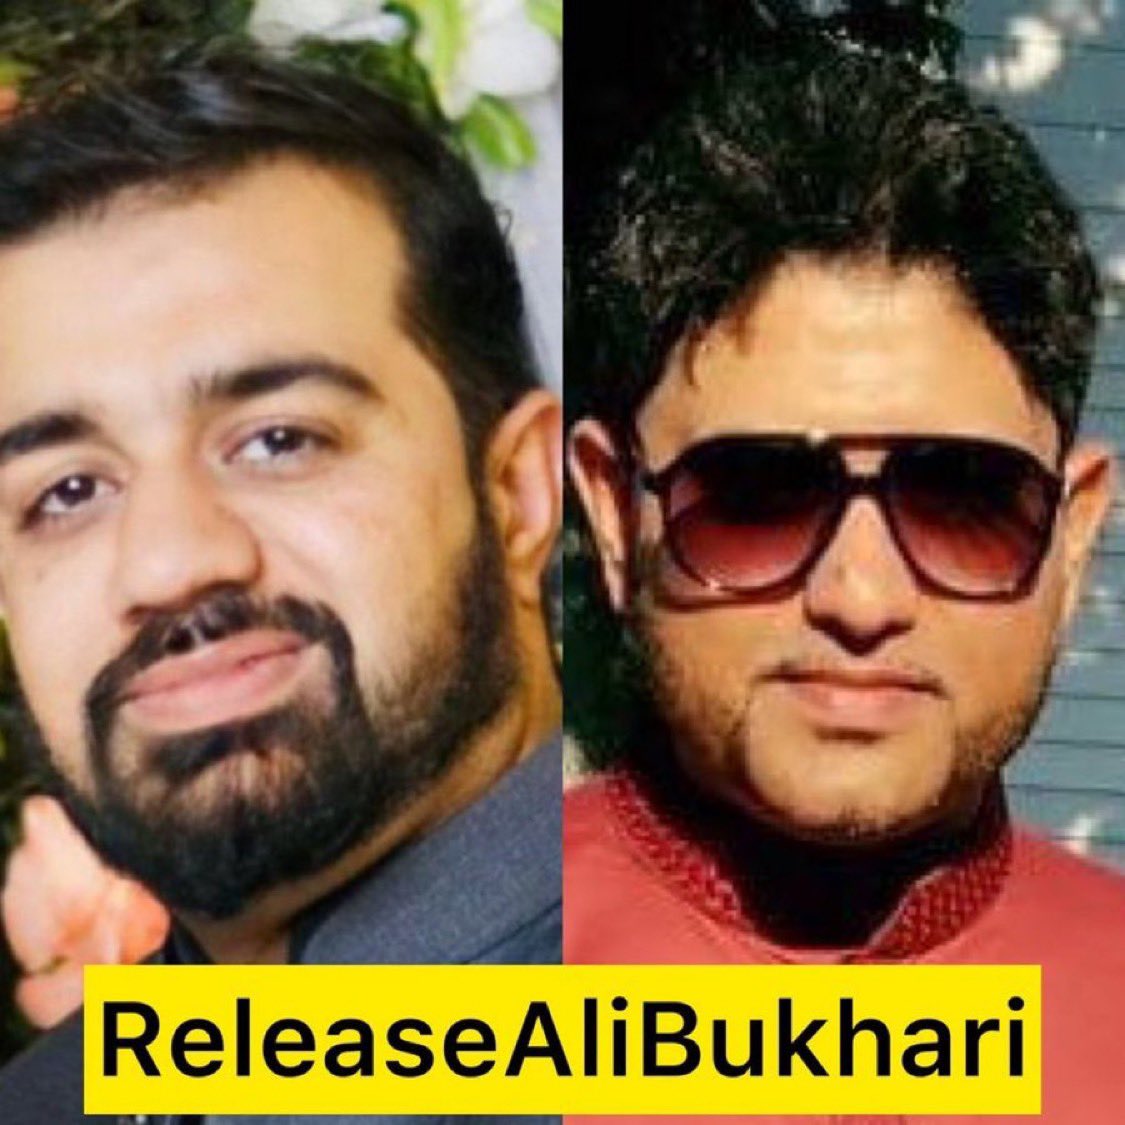 🆘 Release Ali Bukhari Now 🆘

🚨 @ShehryarReal 's brother, who has nothing to do with politics, has been Kidnapped by The Counter Terrorism Department (CTD) in Lahore tonight.

Is this freedom of expression?

Please raise your voice: 
#ReleaseAliBukhari 
#PakistanUnderFascism